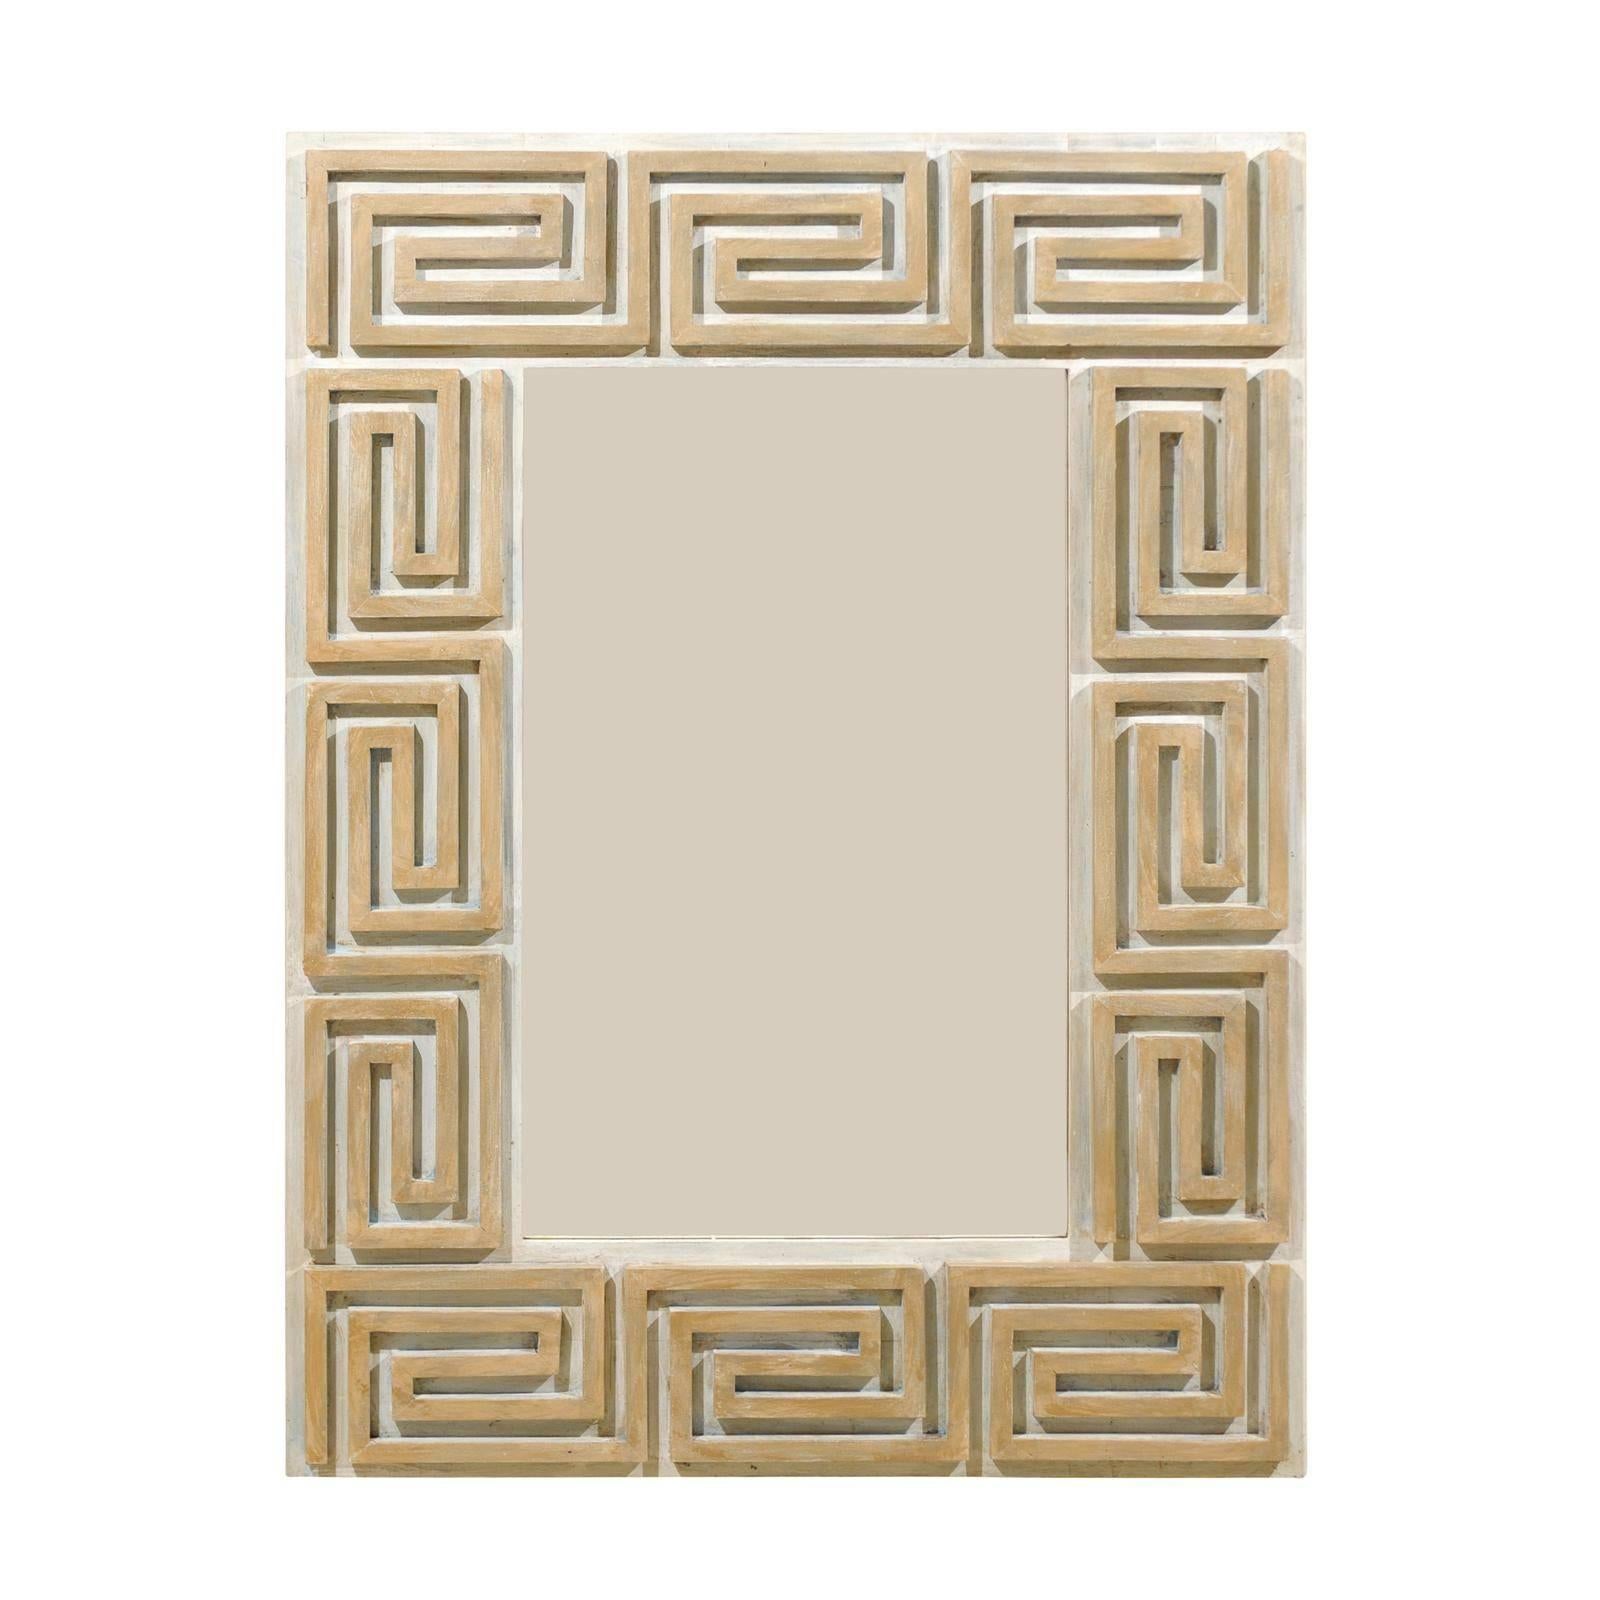 A Large Greek Key Painted Wood Mirror in Neutral Tan, Beige and Cream Color For Sale